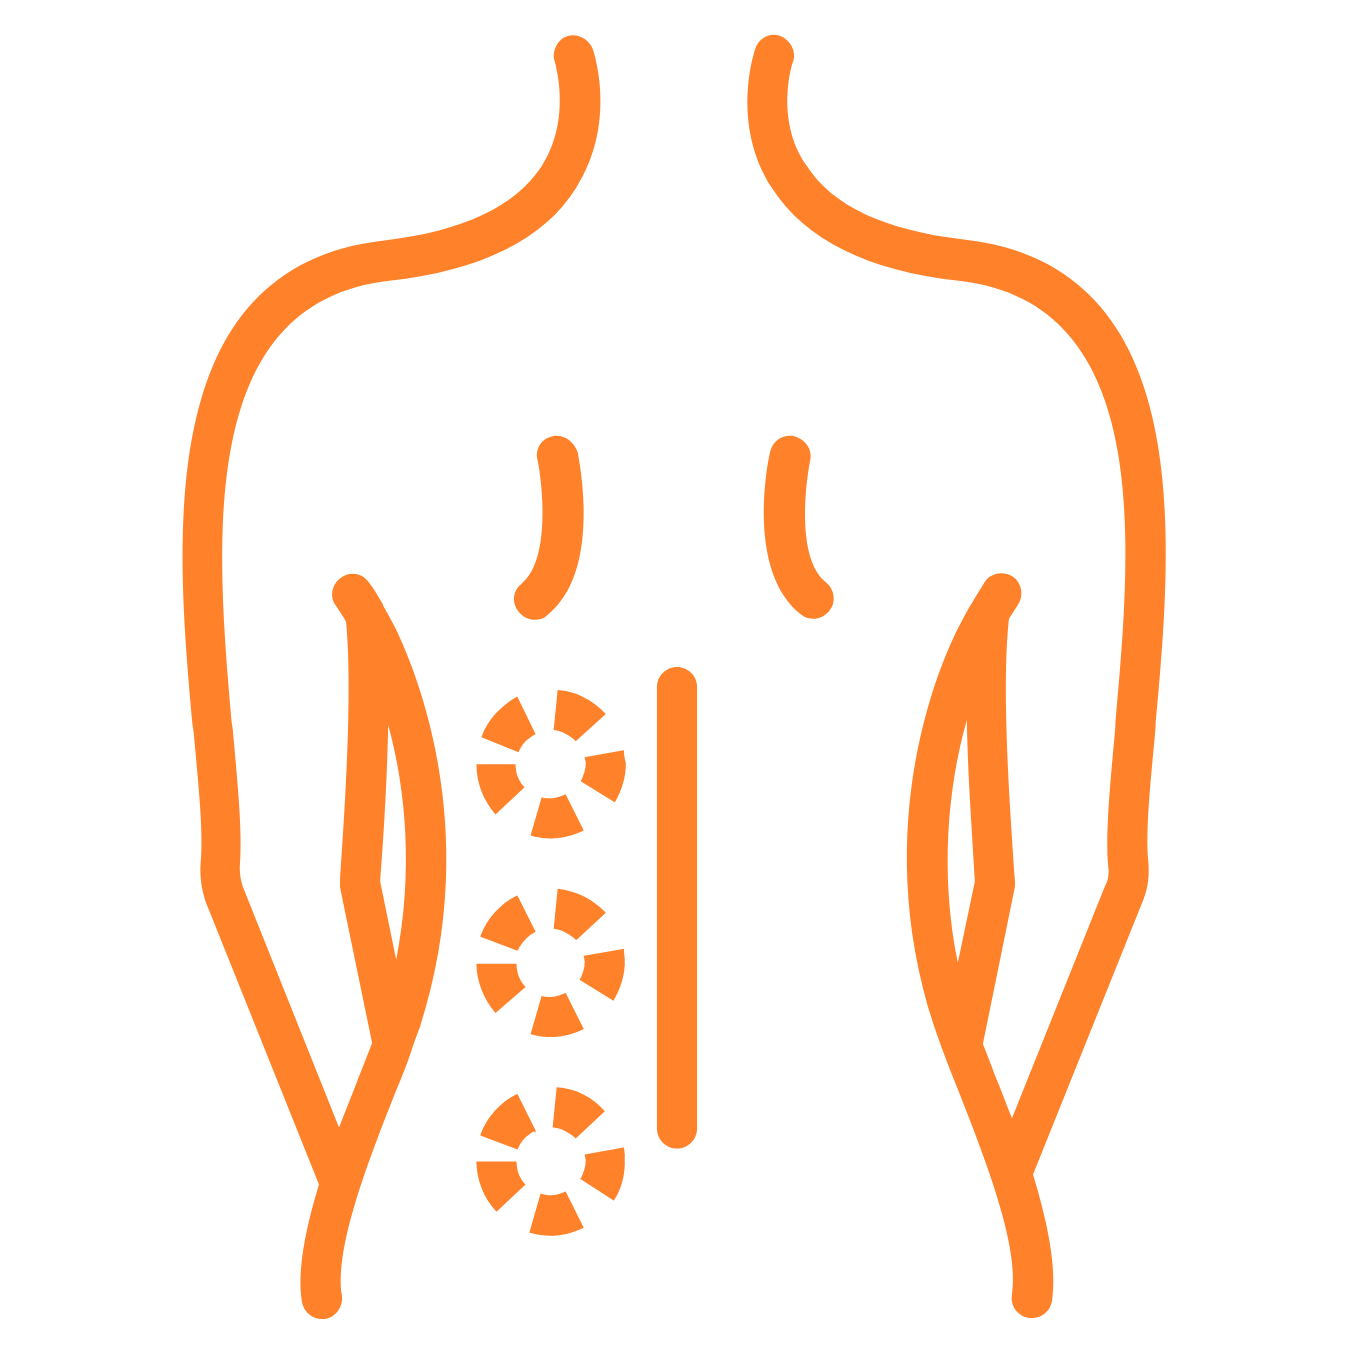 Orange icon depicting the reduction of inflammation. 